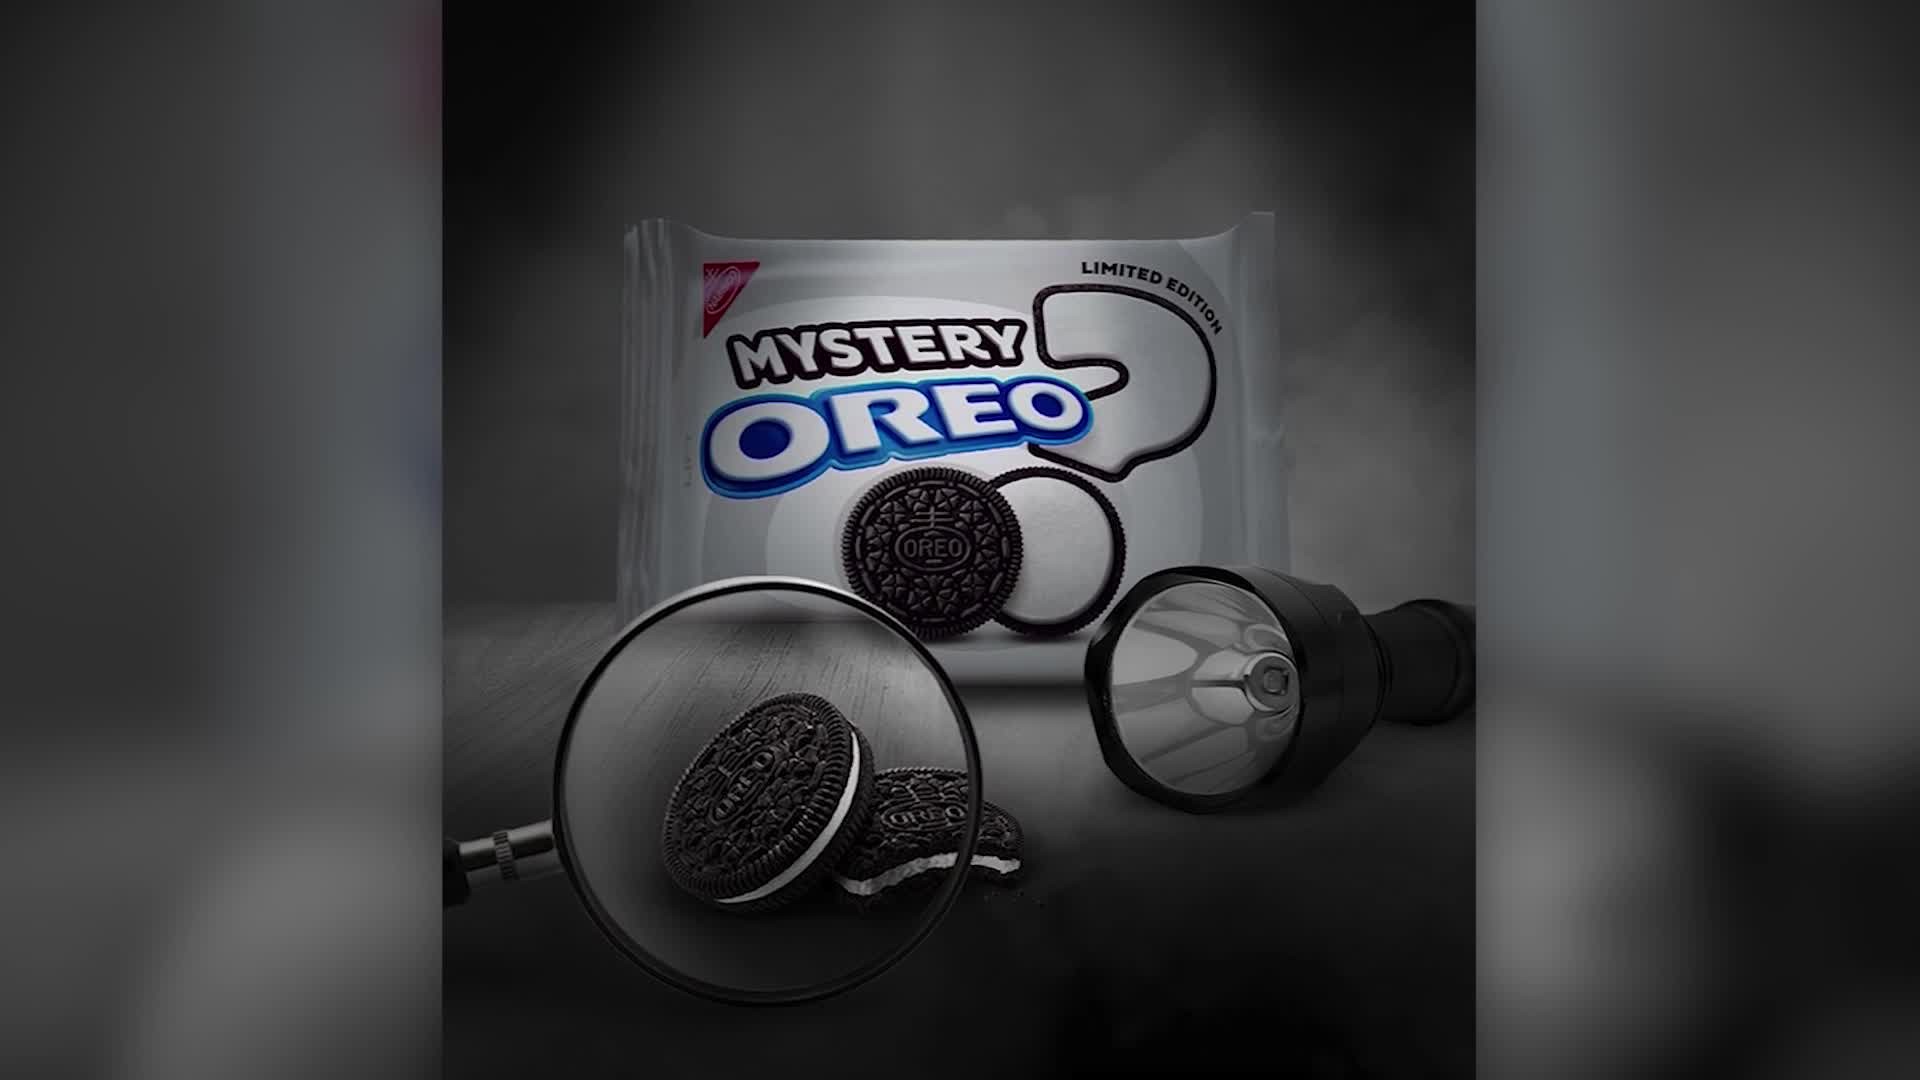 Guess the right mystery Oreo flavor and you could win $50,000